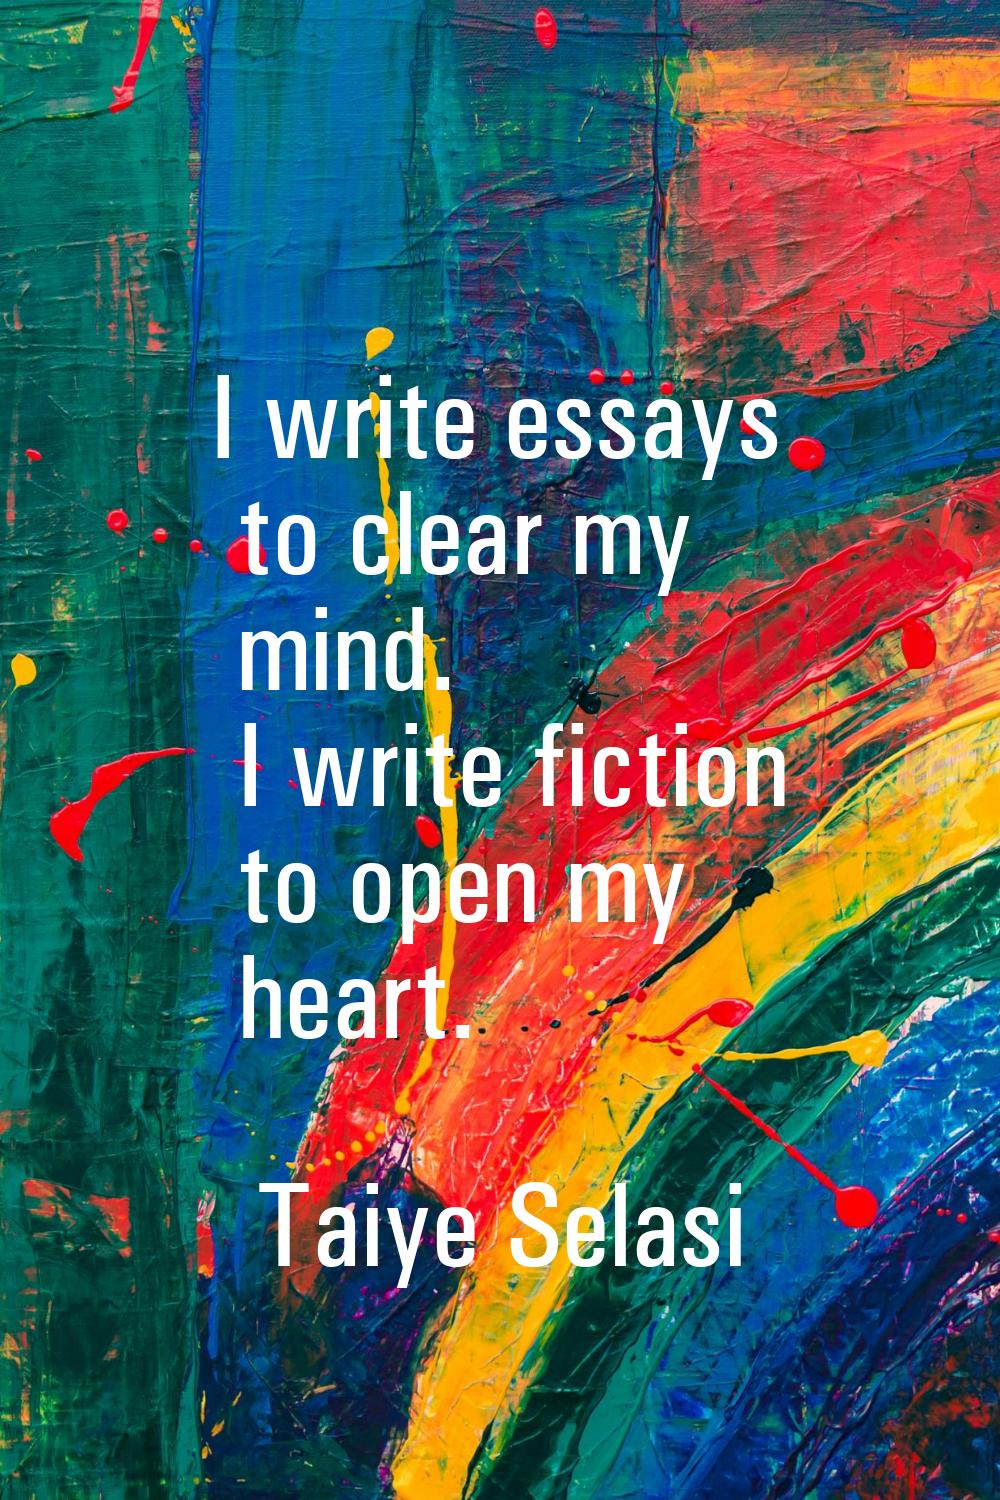 I write essays to clear my mind. I write fiction to open my heart.